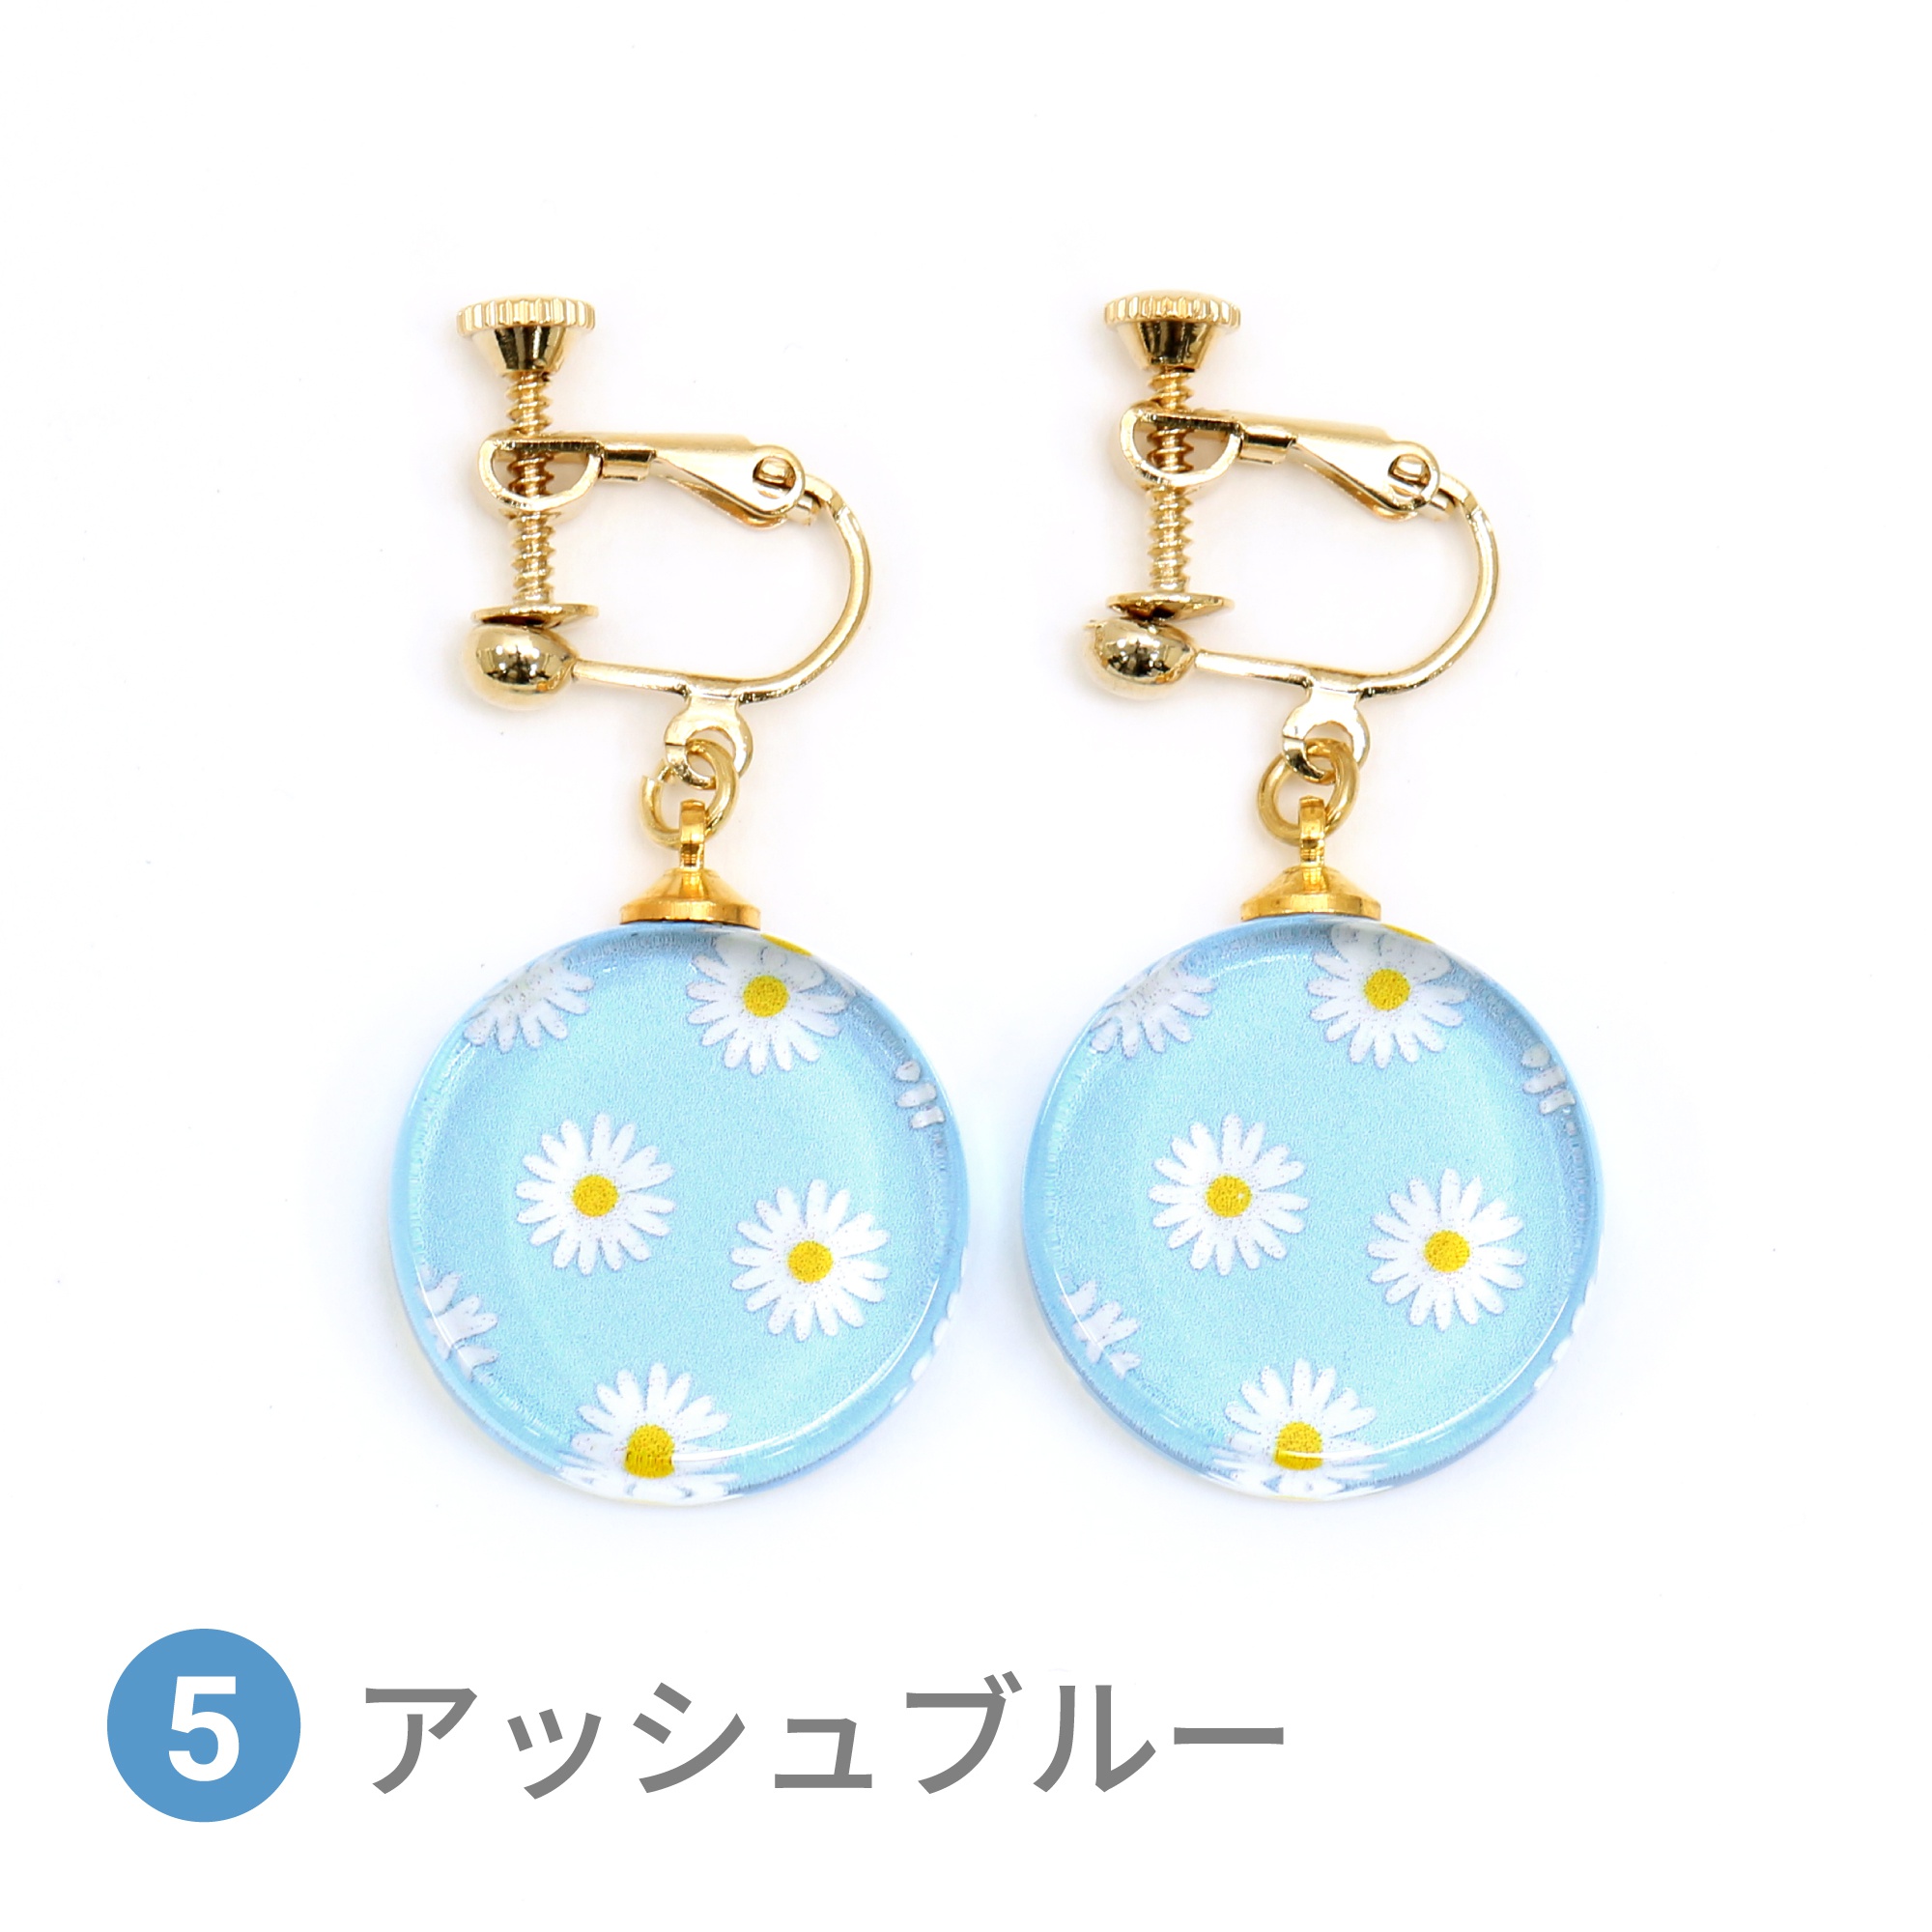 Glass accessories Earring MARGARET ashblue round shape